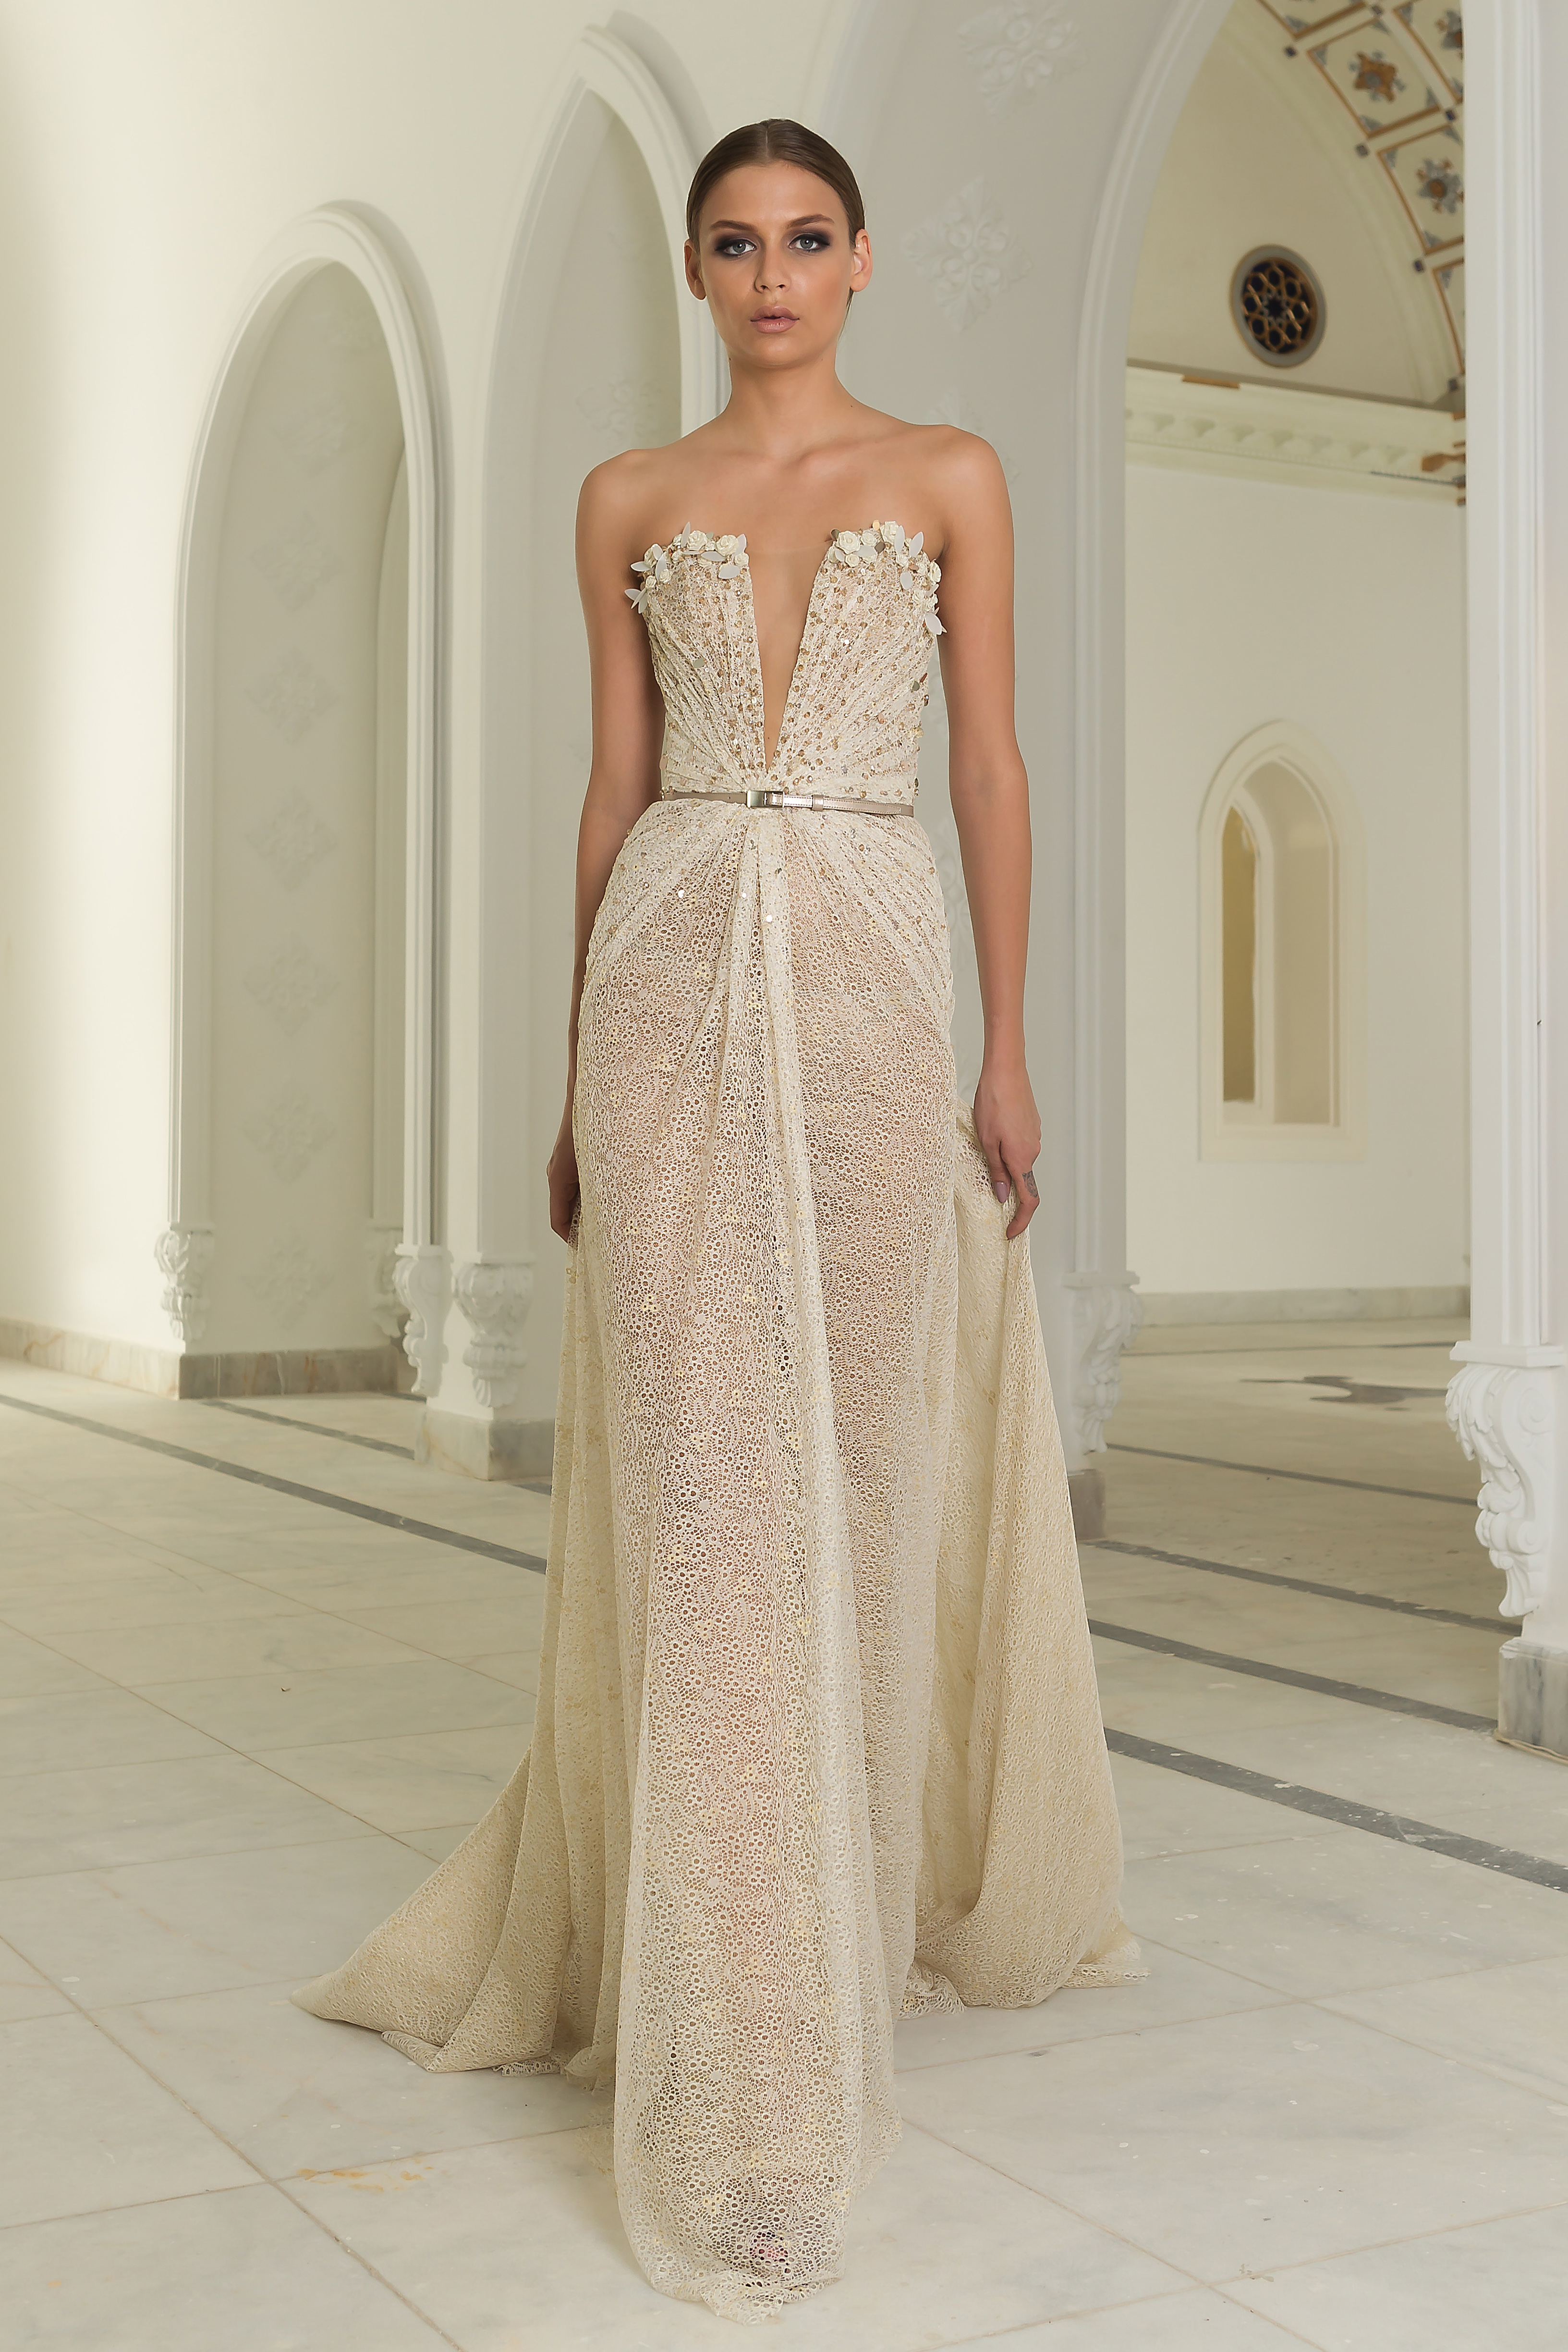 Abed Mahfouz Fall Winter 2014 2015 Haute Couture Collection